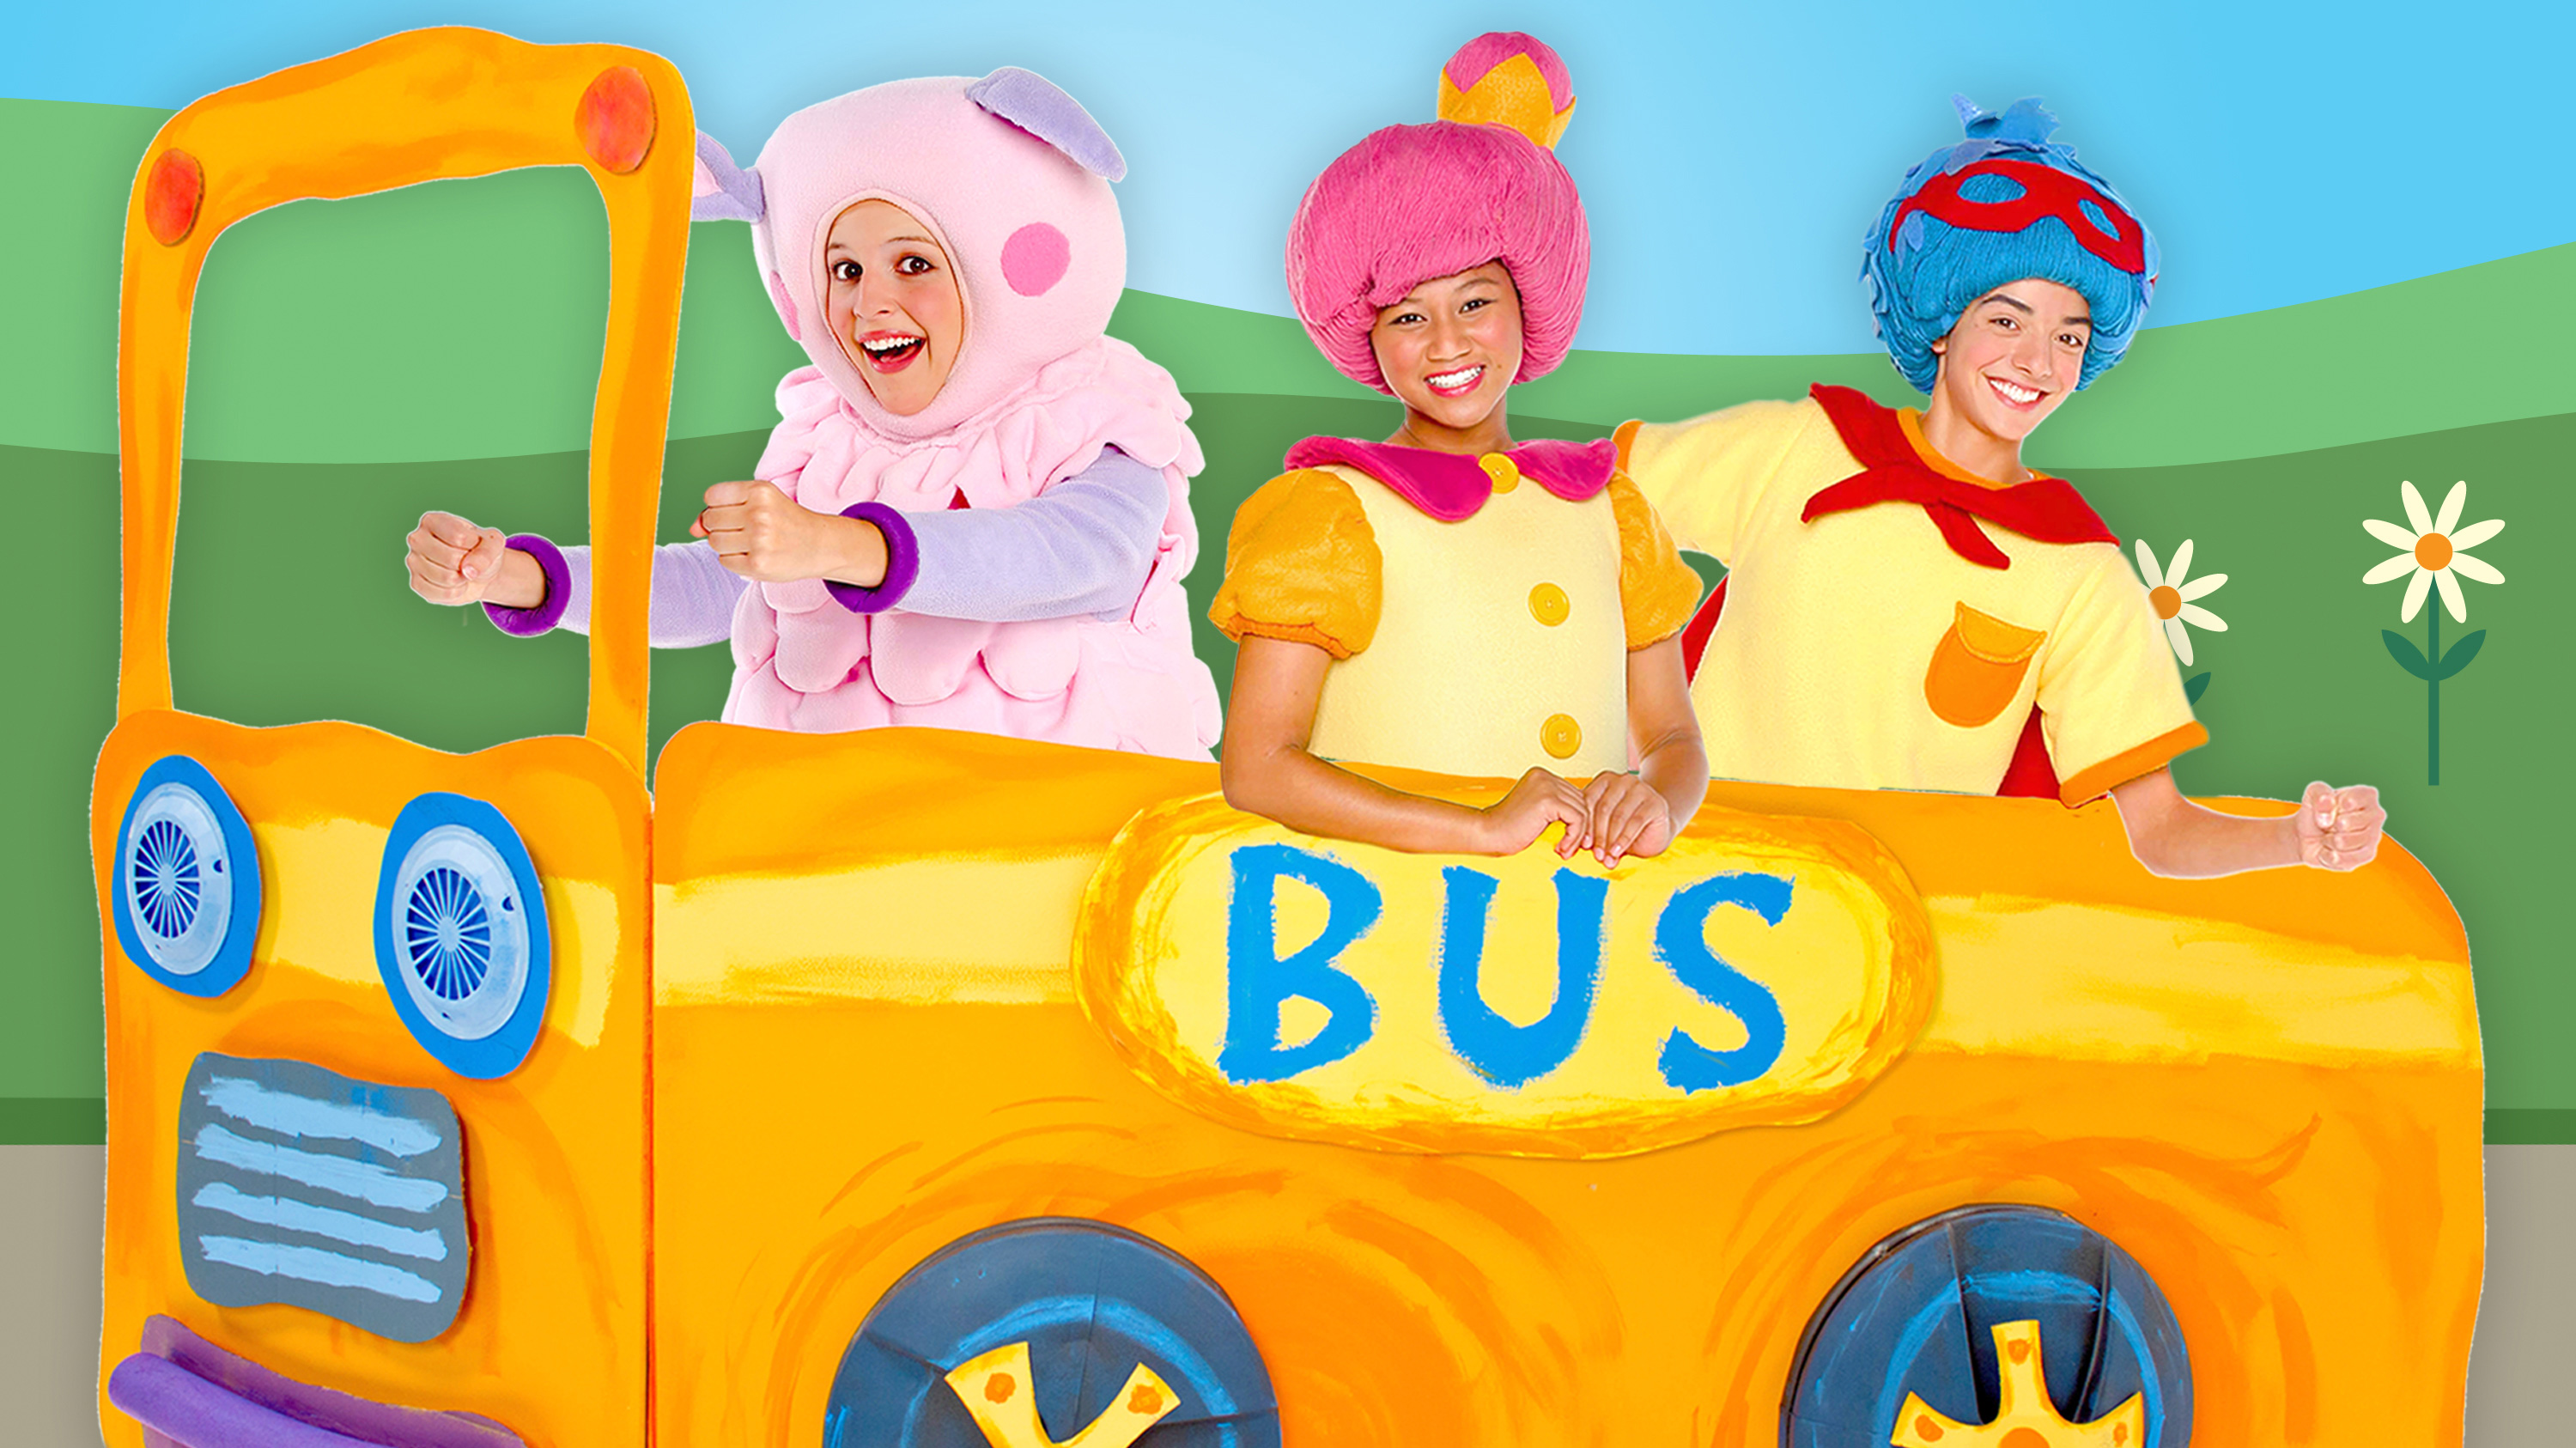 The Wheels on the Bus   Nursery Rhymes   Mother Goose Club